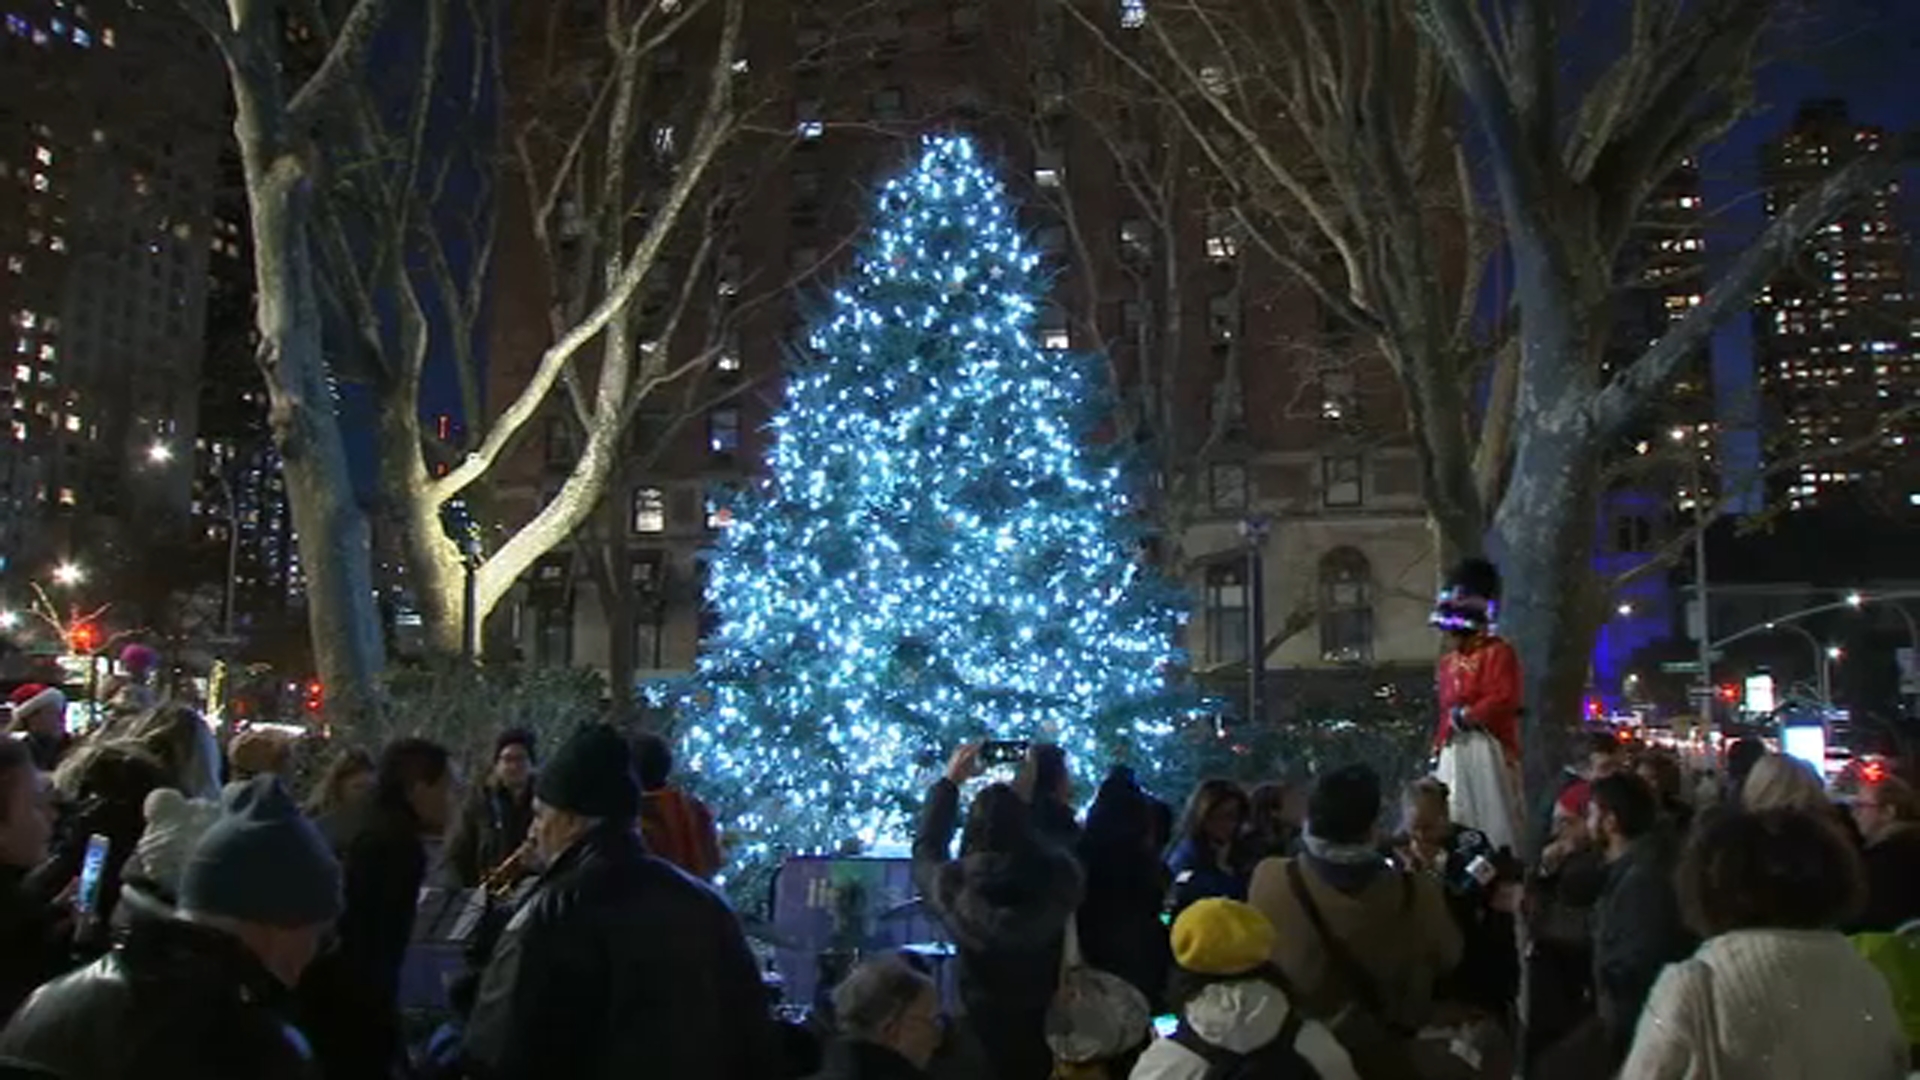 Christmas trees could cost you up to 20% more this year amid inflation